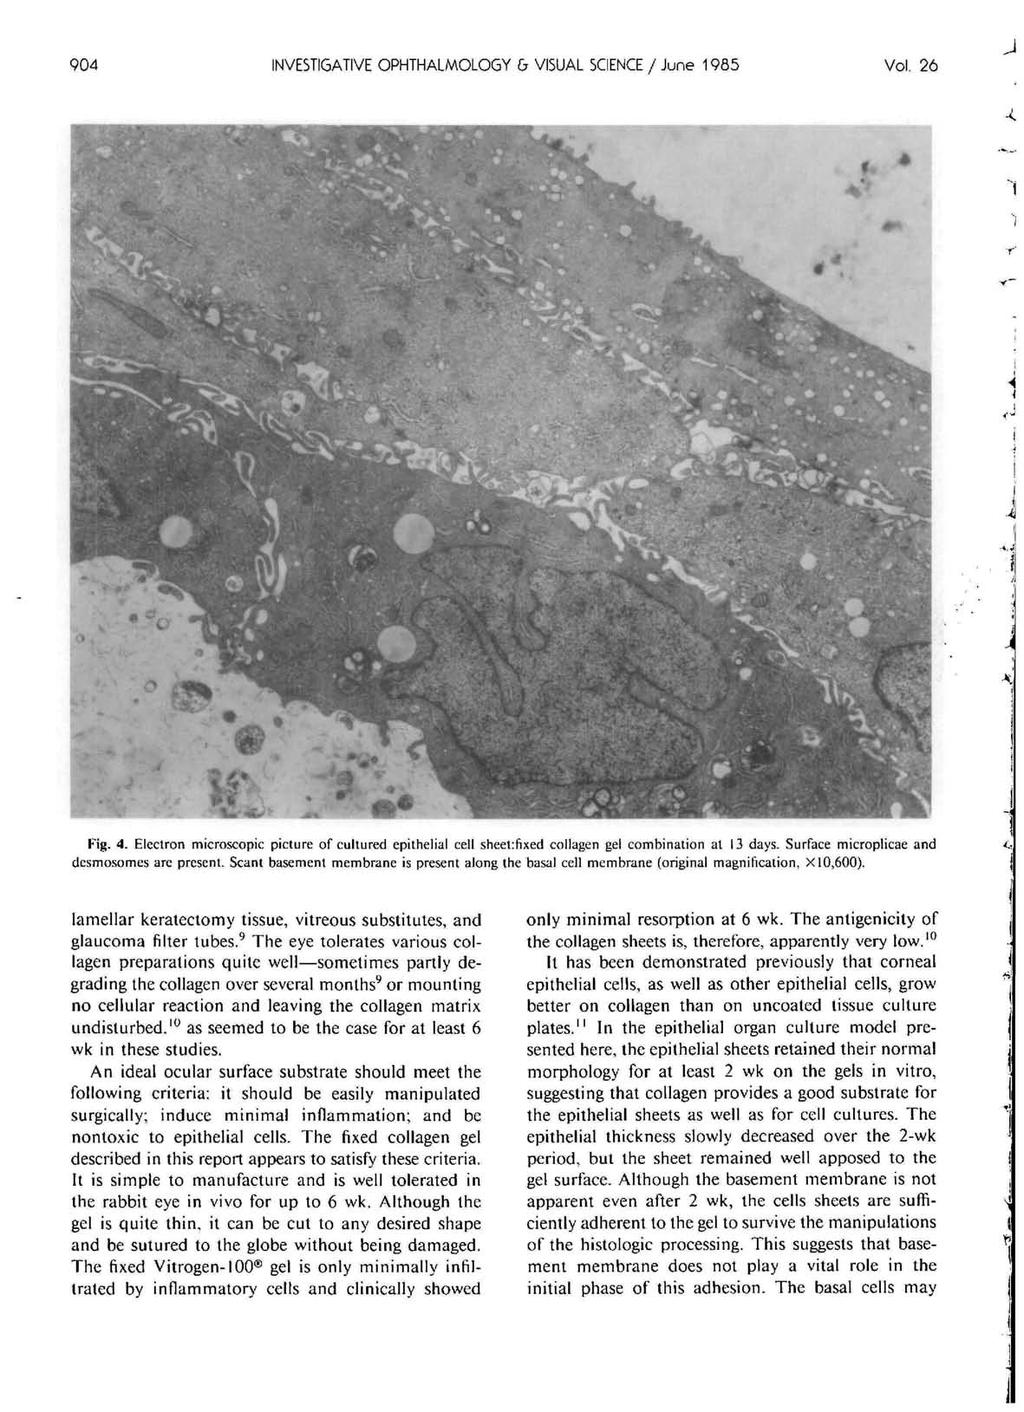 904 INVESTIGATIVE OPHTHALMOLOGY & VISUAL SCIENCE / June 1985 Vol. 26 Kig. 4. Electron microscopic picture of cultured epithelial cell sheet:fixed collagen gel combination at 13 days.